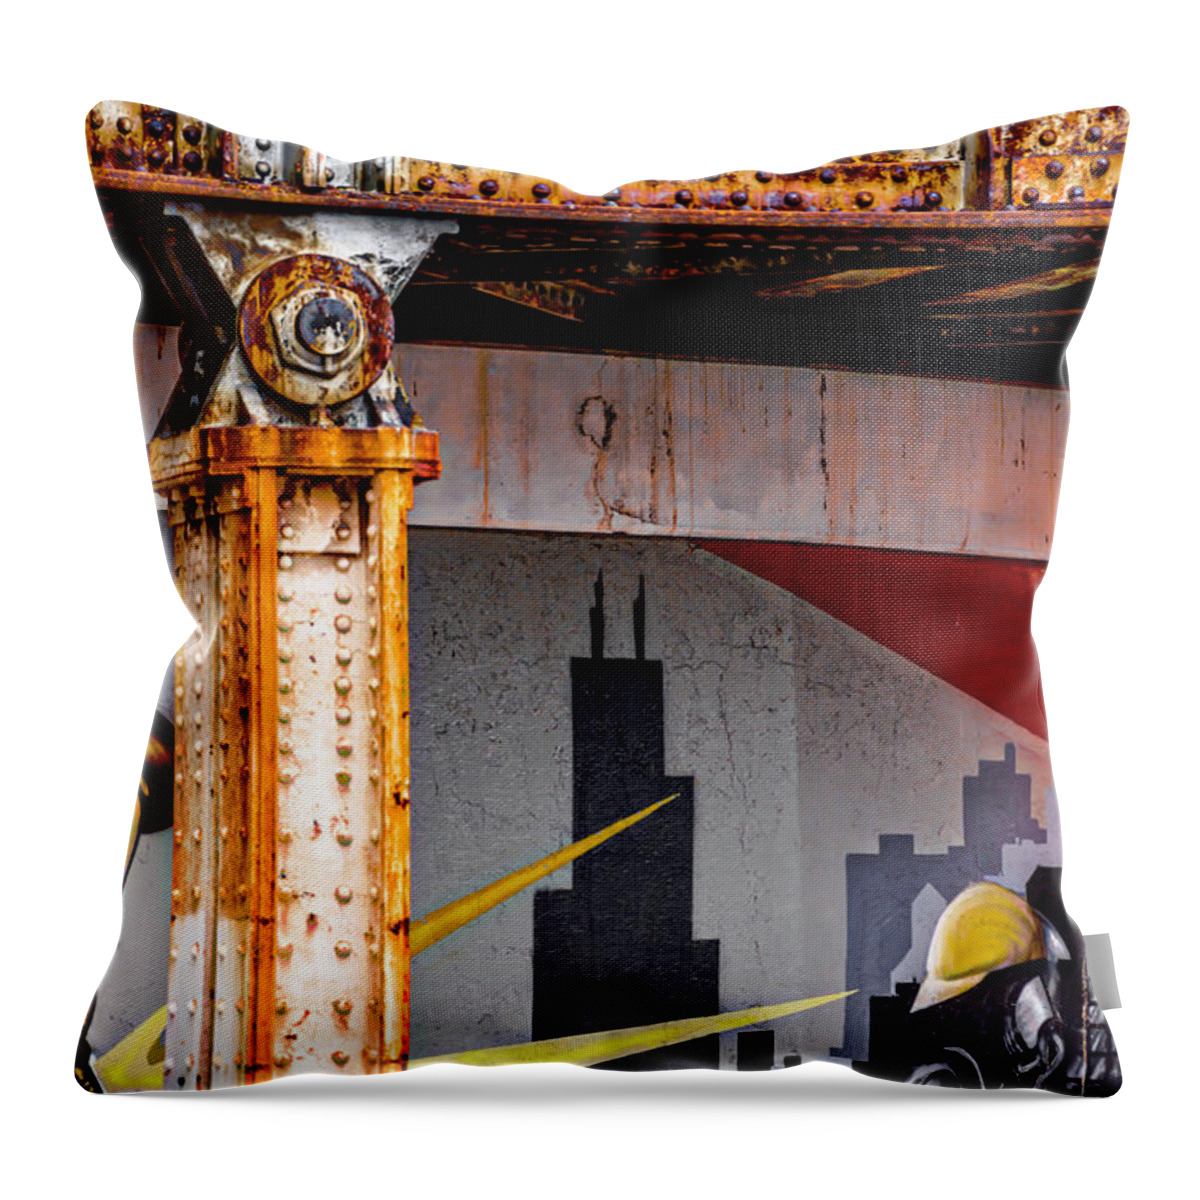 #chicago #architecture #downtown #abstract #design #art #photography #design #abstractarchitecturalphotography #firefighters #fireman Throw Pillow featuring the photograph FlairMax Industries Sponsors 2010 Chicago Fireman Mural v5 DSC_0613 by Raymond Kunst